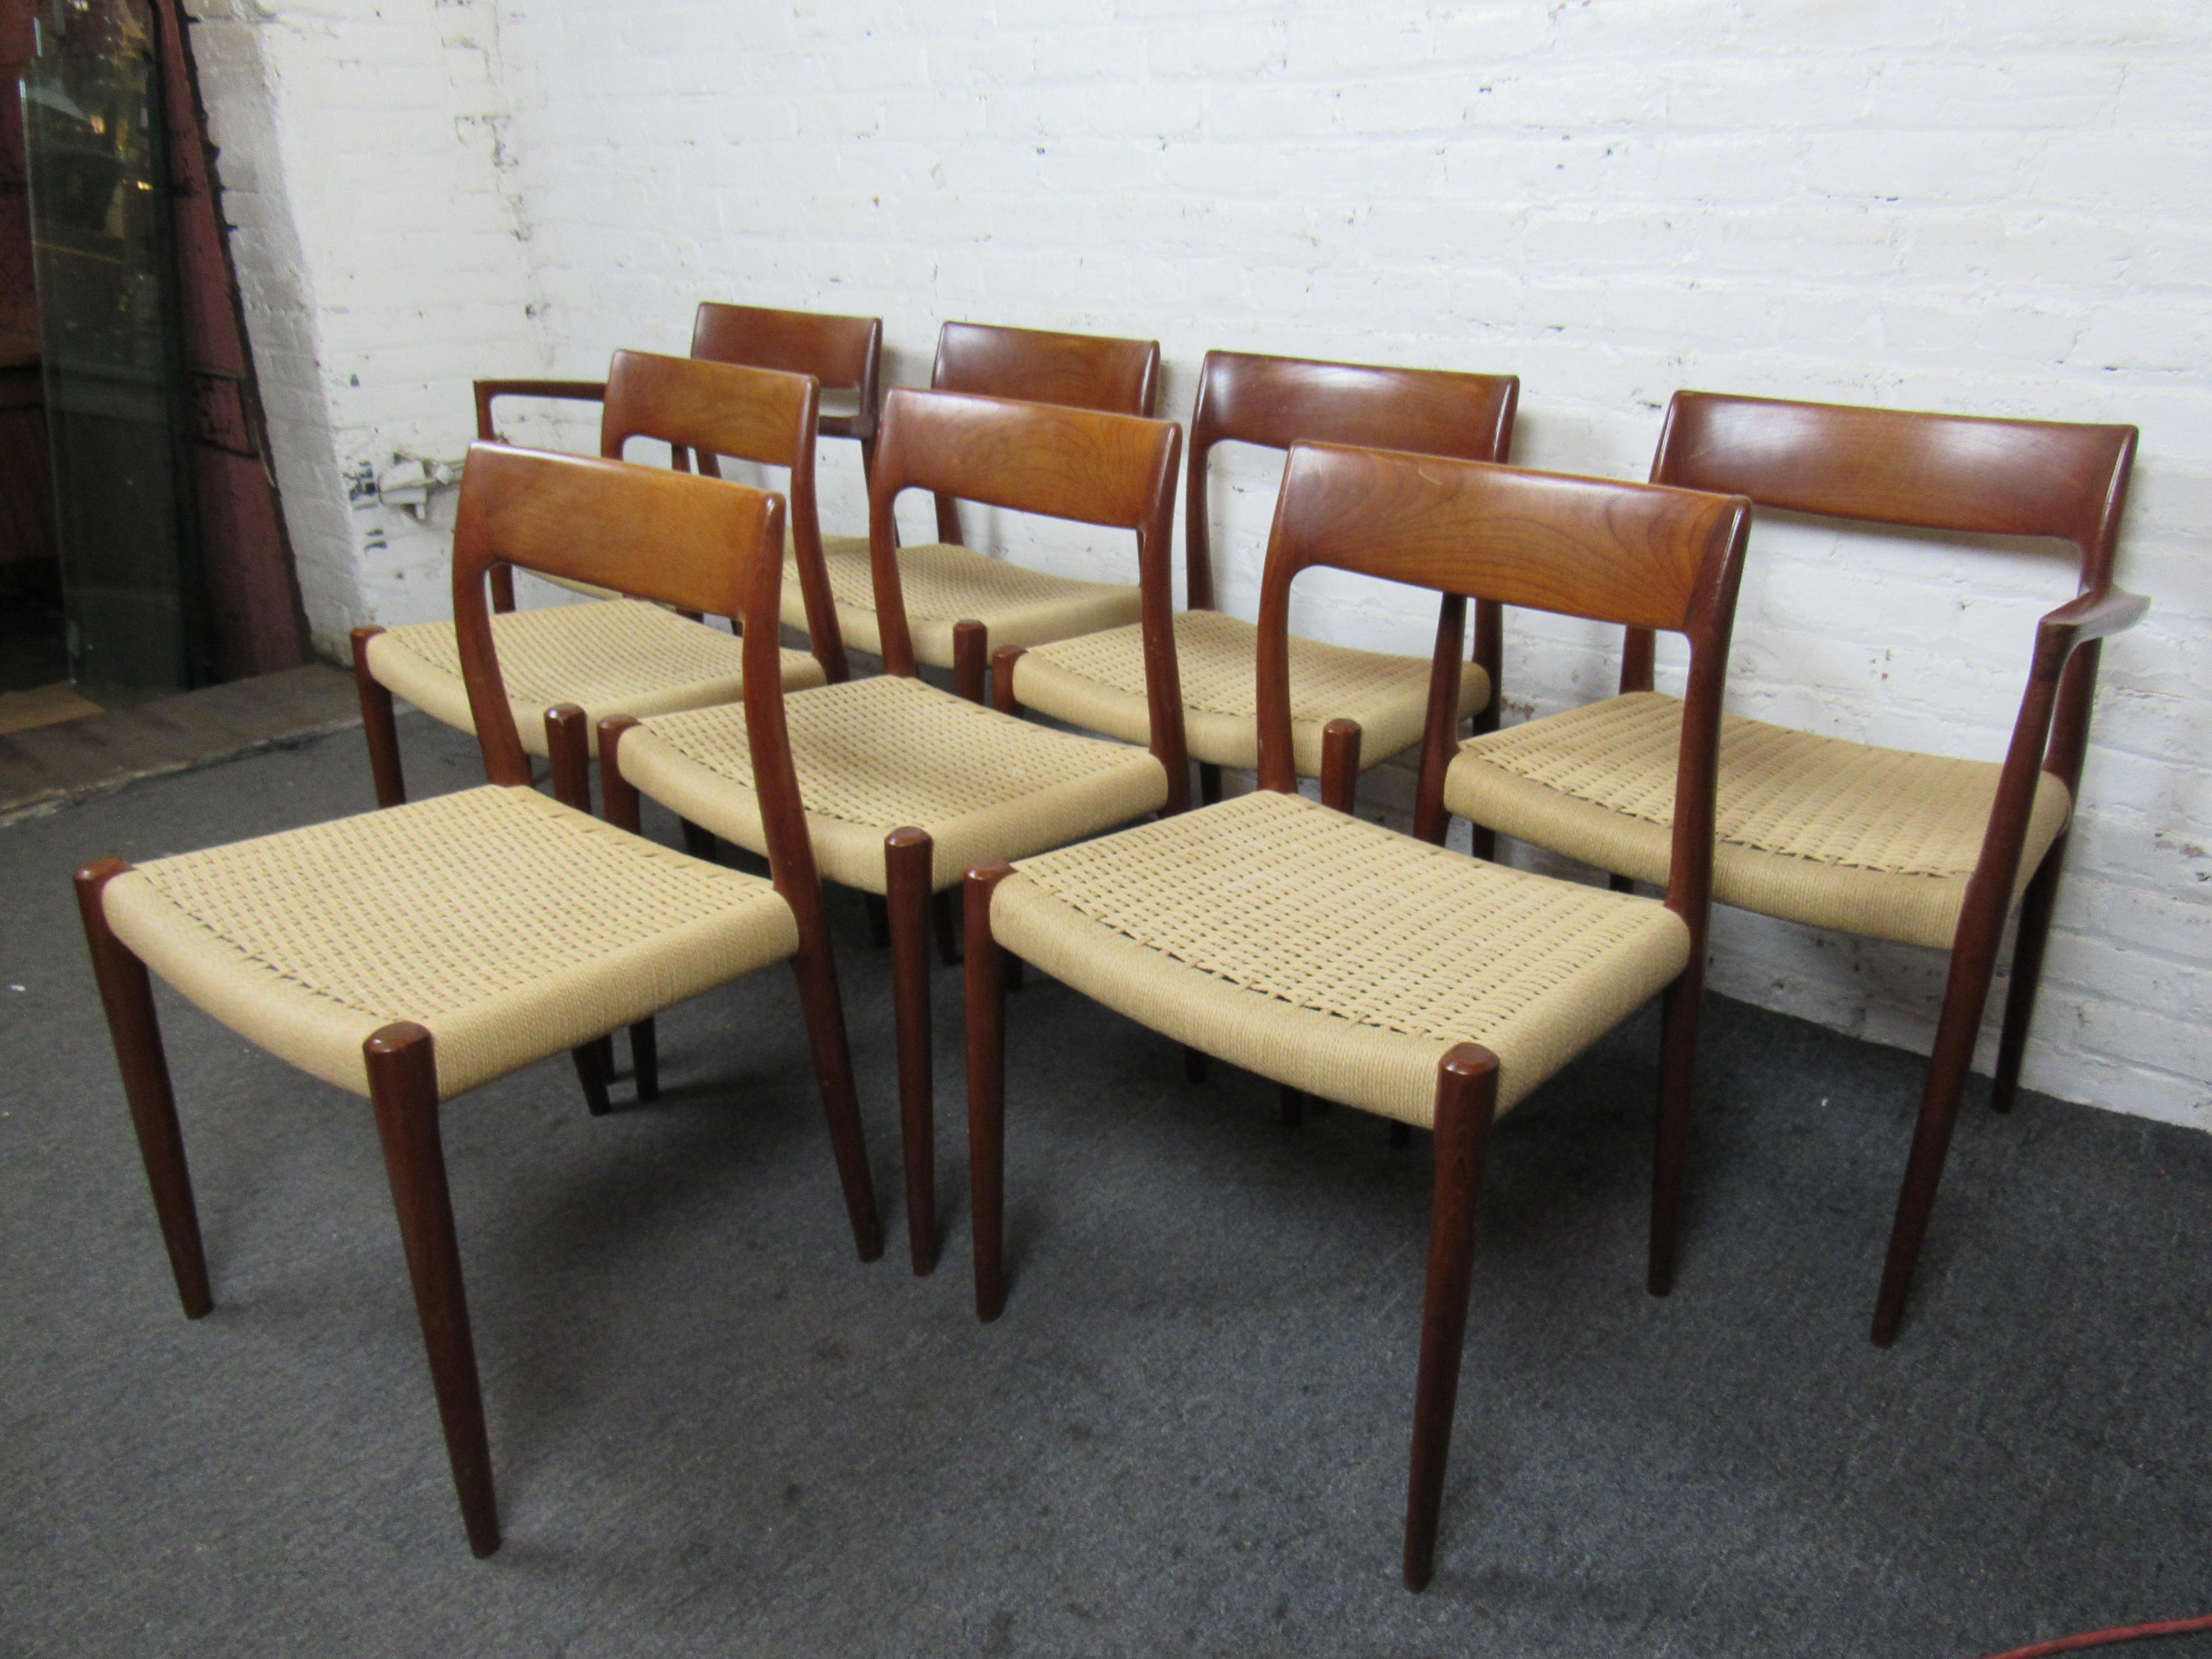 This set of eight teak dining room chairs by Møller offer the understated style and craftsmanship characteristic to Mid-Century Danish design. Two chairs with arms can be placed at either end of a dining table, while six other chairs complete the